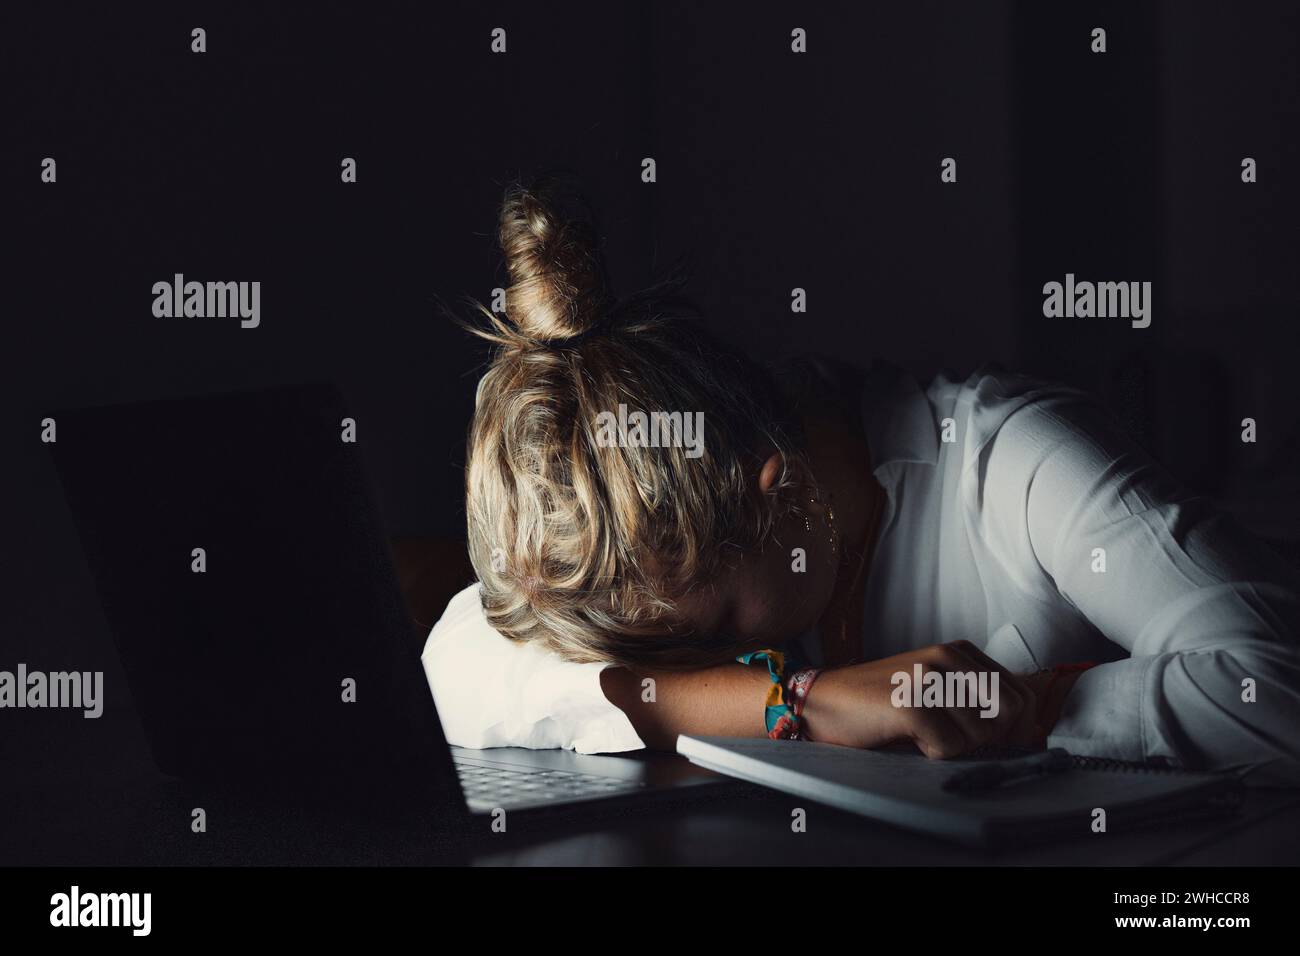 Tired teen girl caucasian university student fall asleep exhausted after difficult learn exam test, deprived lazy young woman sleeping sit at desk feel fatigue having nap dozing bored of study concept Stock Photo